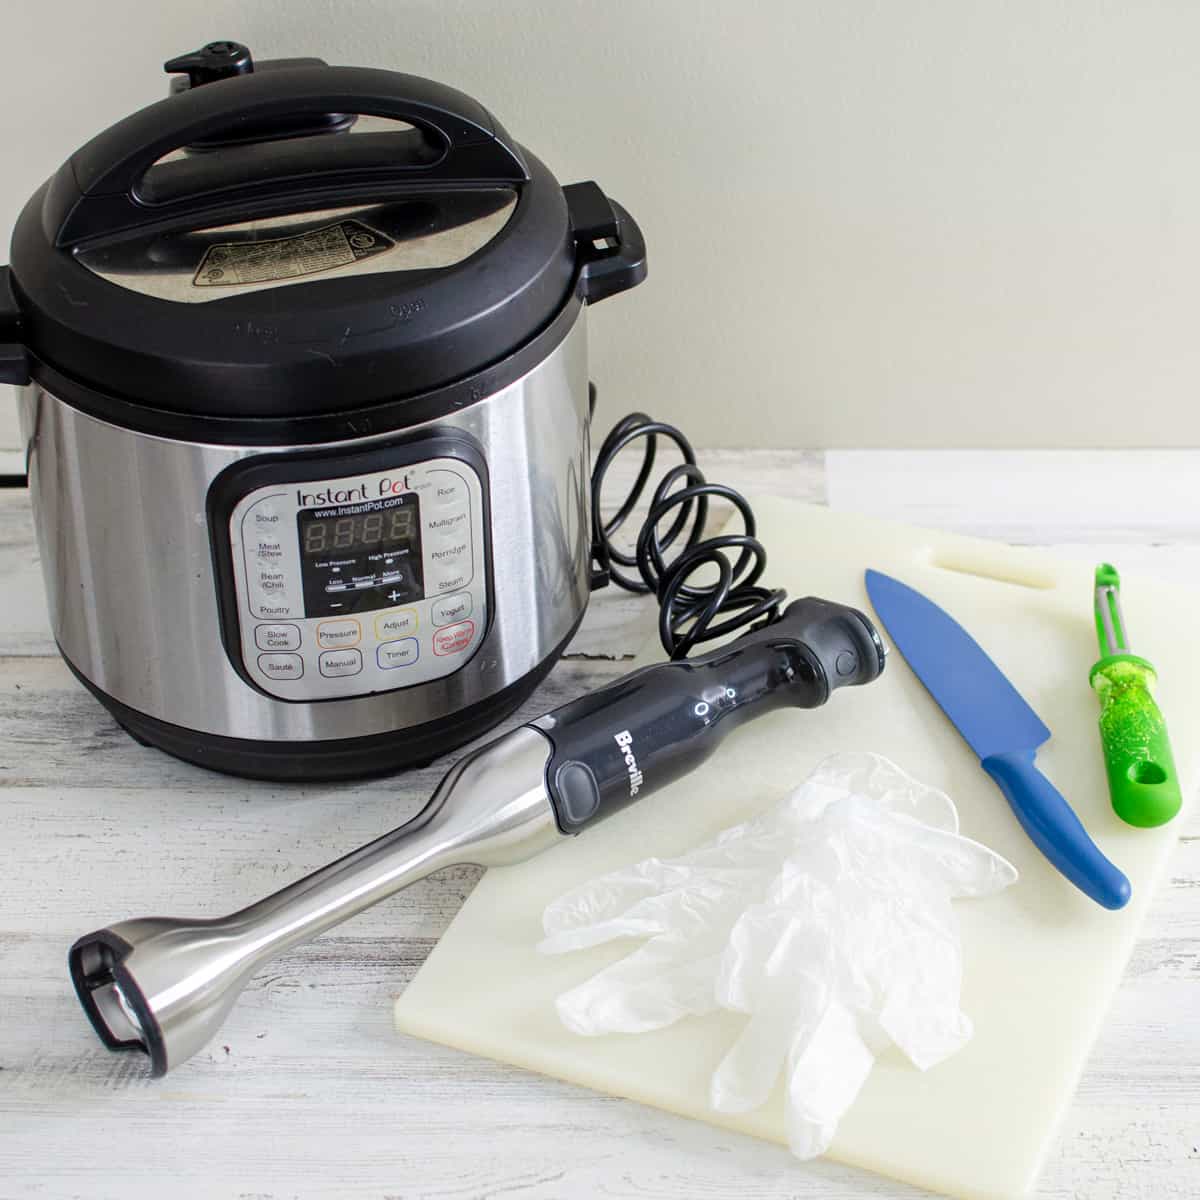 An Instant Pot, stick blender, chef knife, vegetable peeler, food prep gloves, and a cutting board